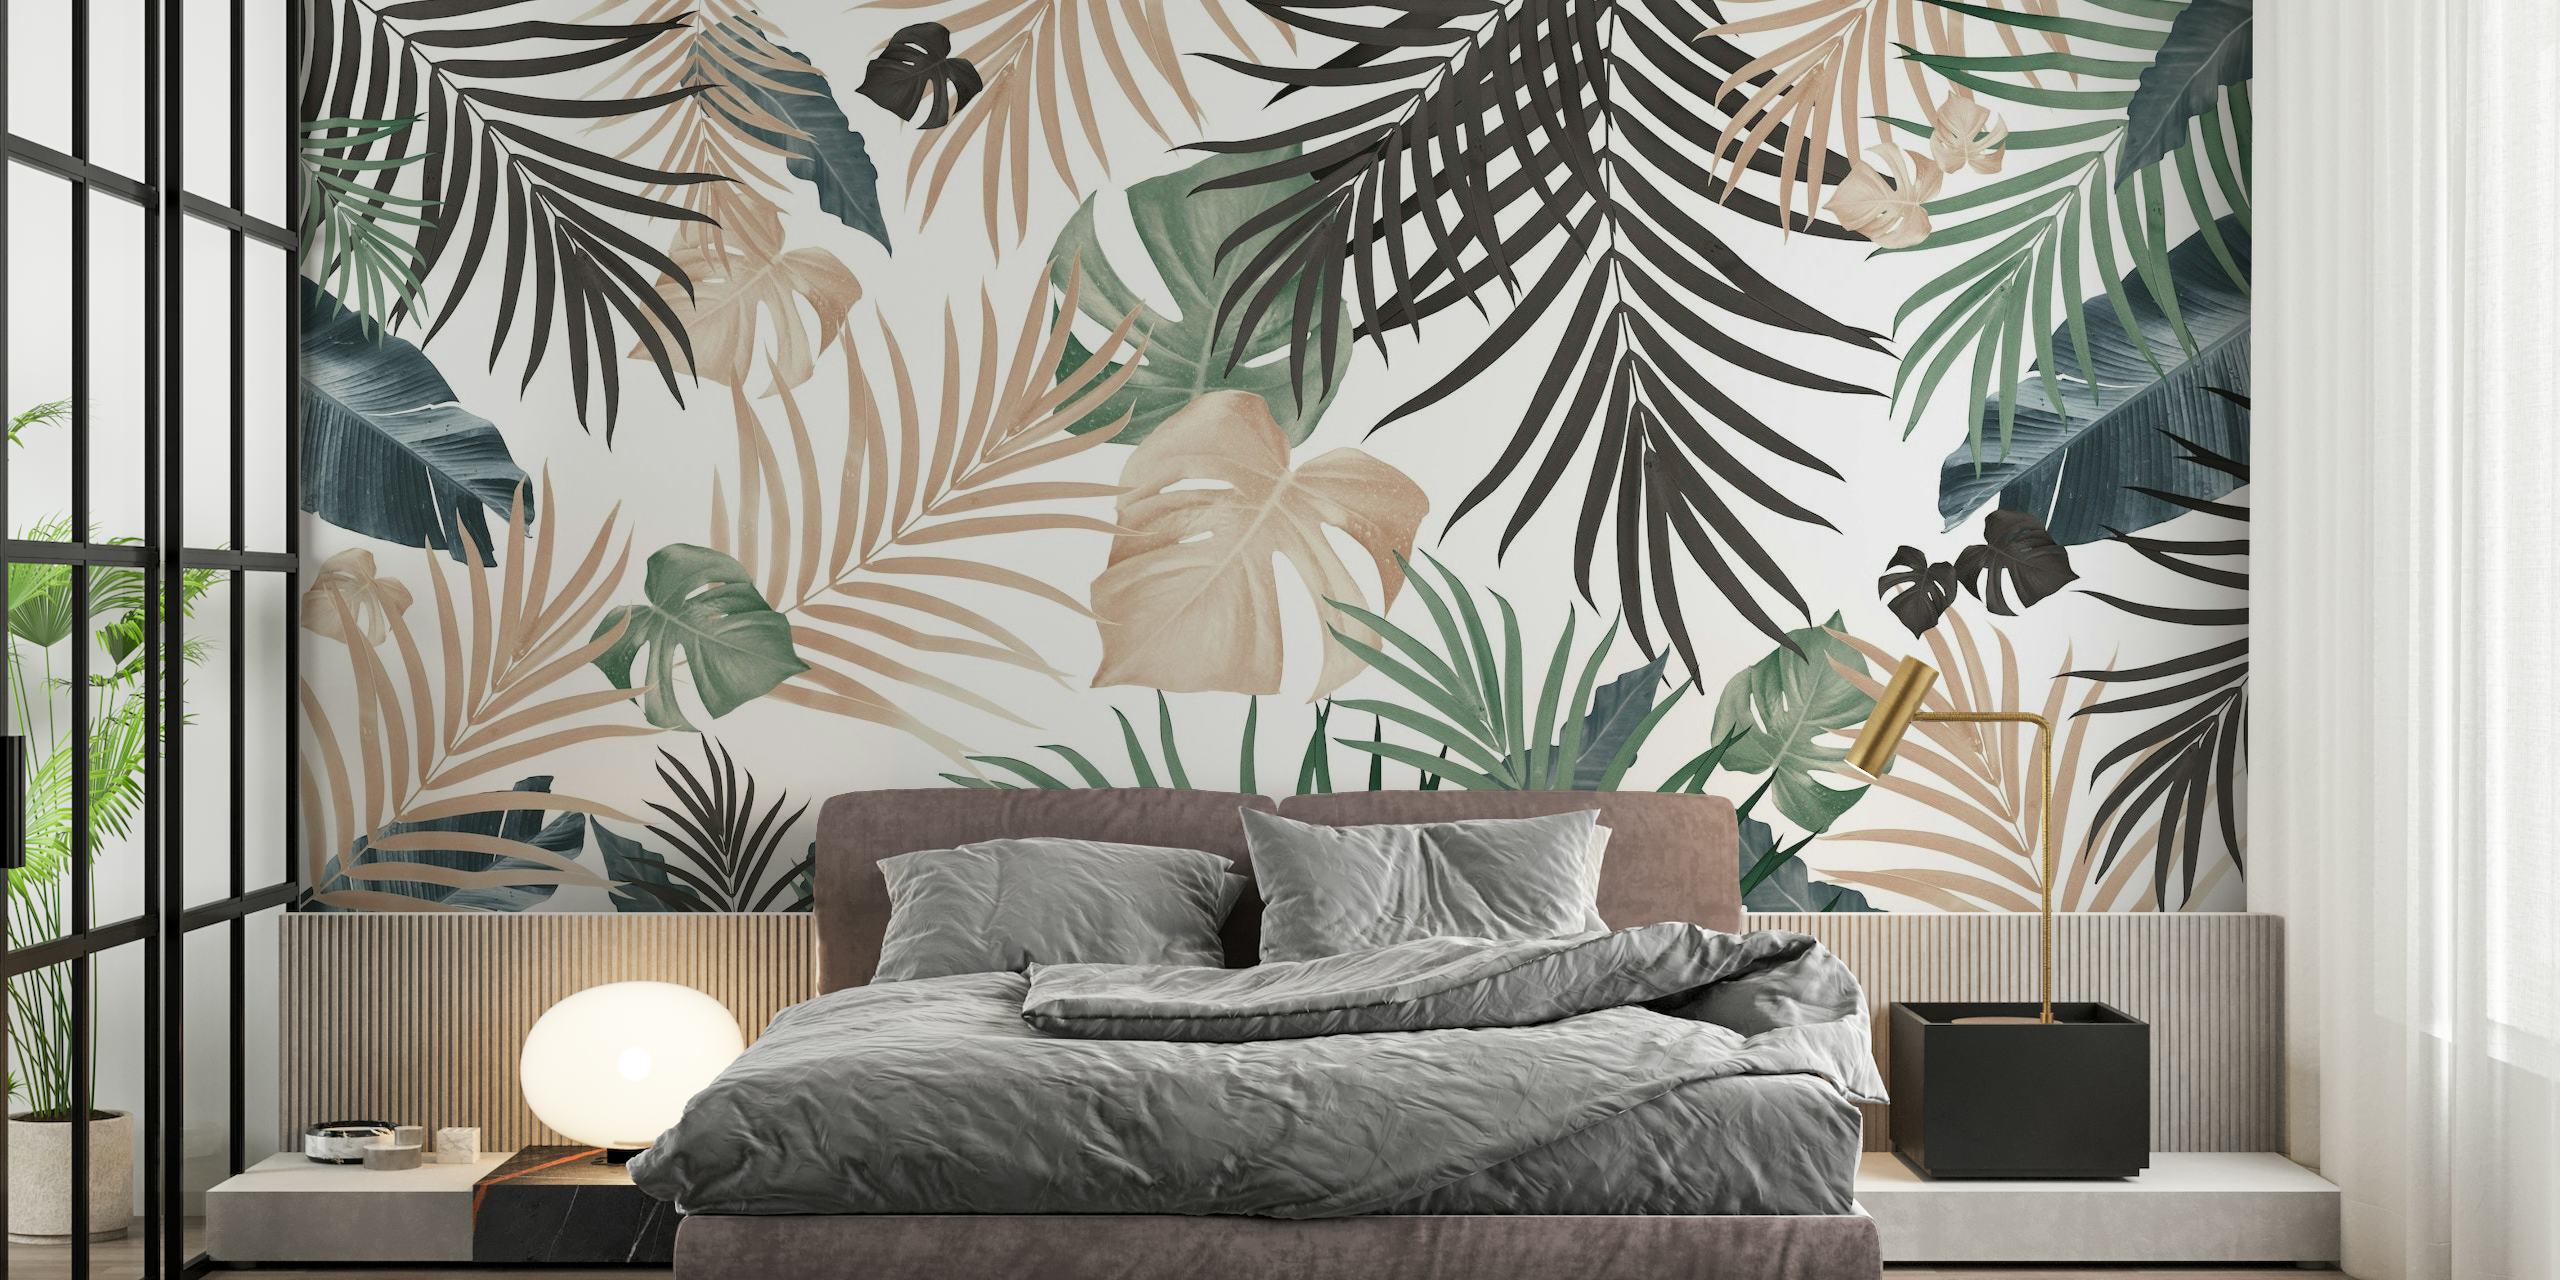 Artistic tropical leaves wall mural with a soft color palette